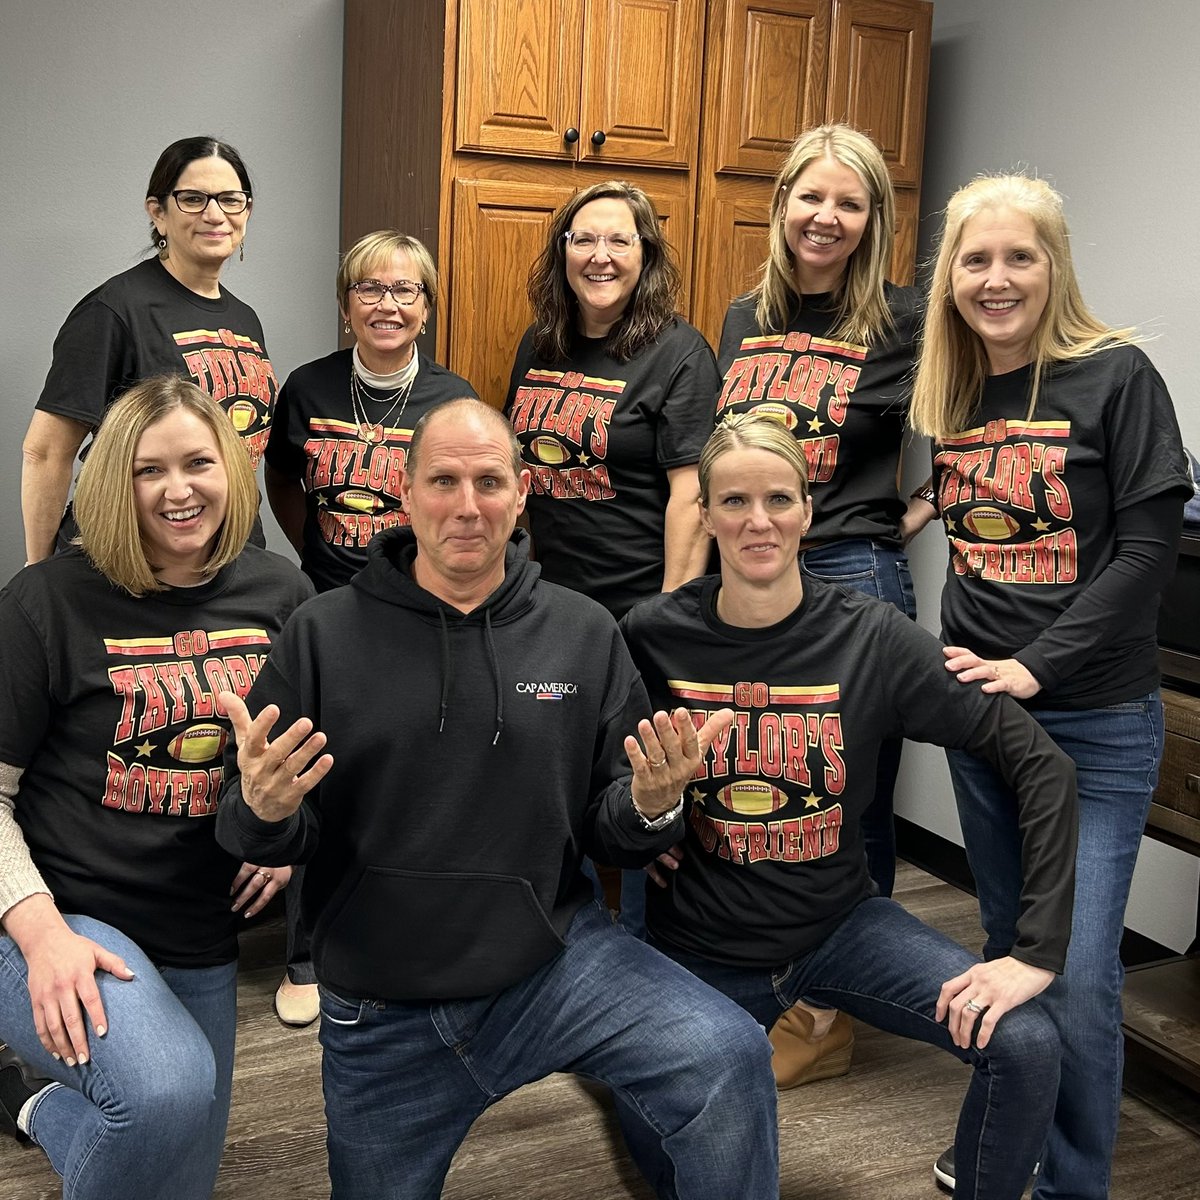 We’re our SVP of Production’s biggest fans … of course we’re going to wear “Taylor’s Boyfriend” shirts just for him! ❤️💛 #CapAmerica #InOurChiefsEra #GoChiefs #Missouri